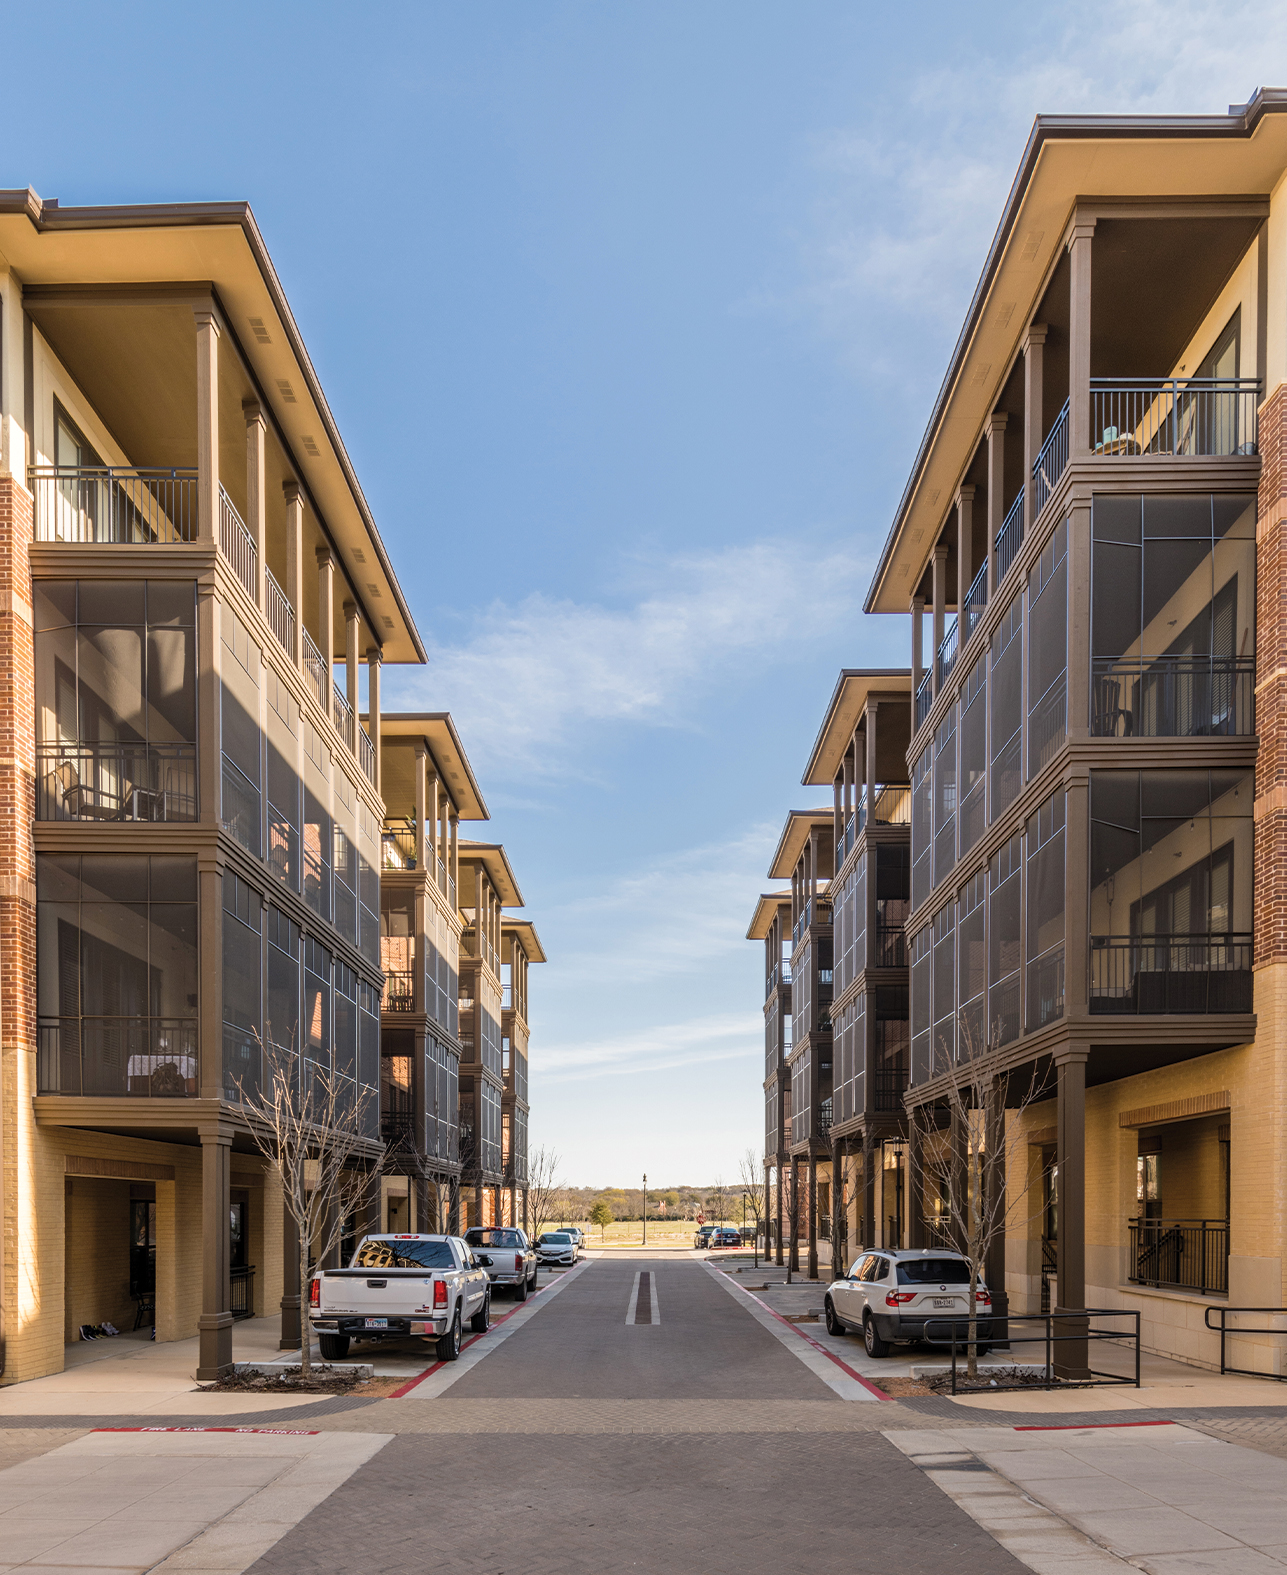 The Kelton at Clearfork - Apartments in Fort Worth, TX